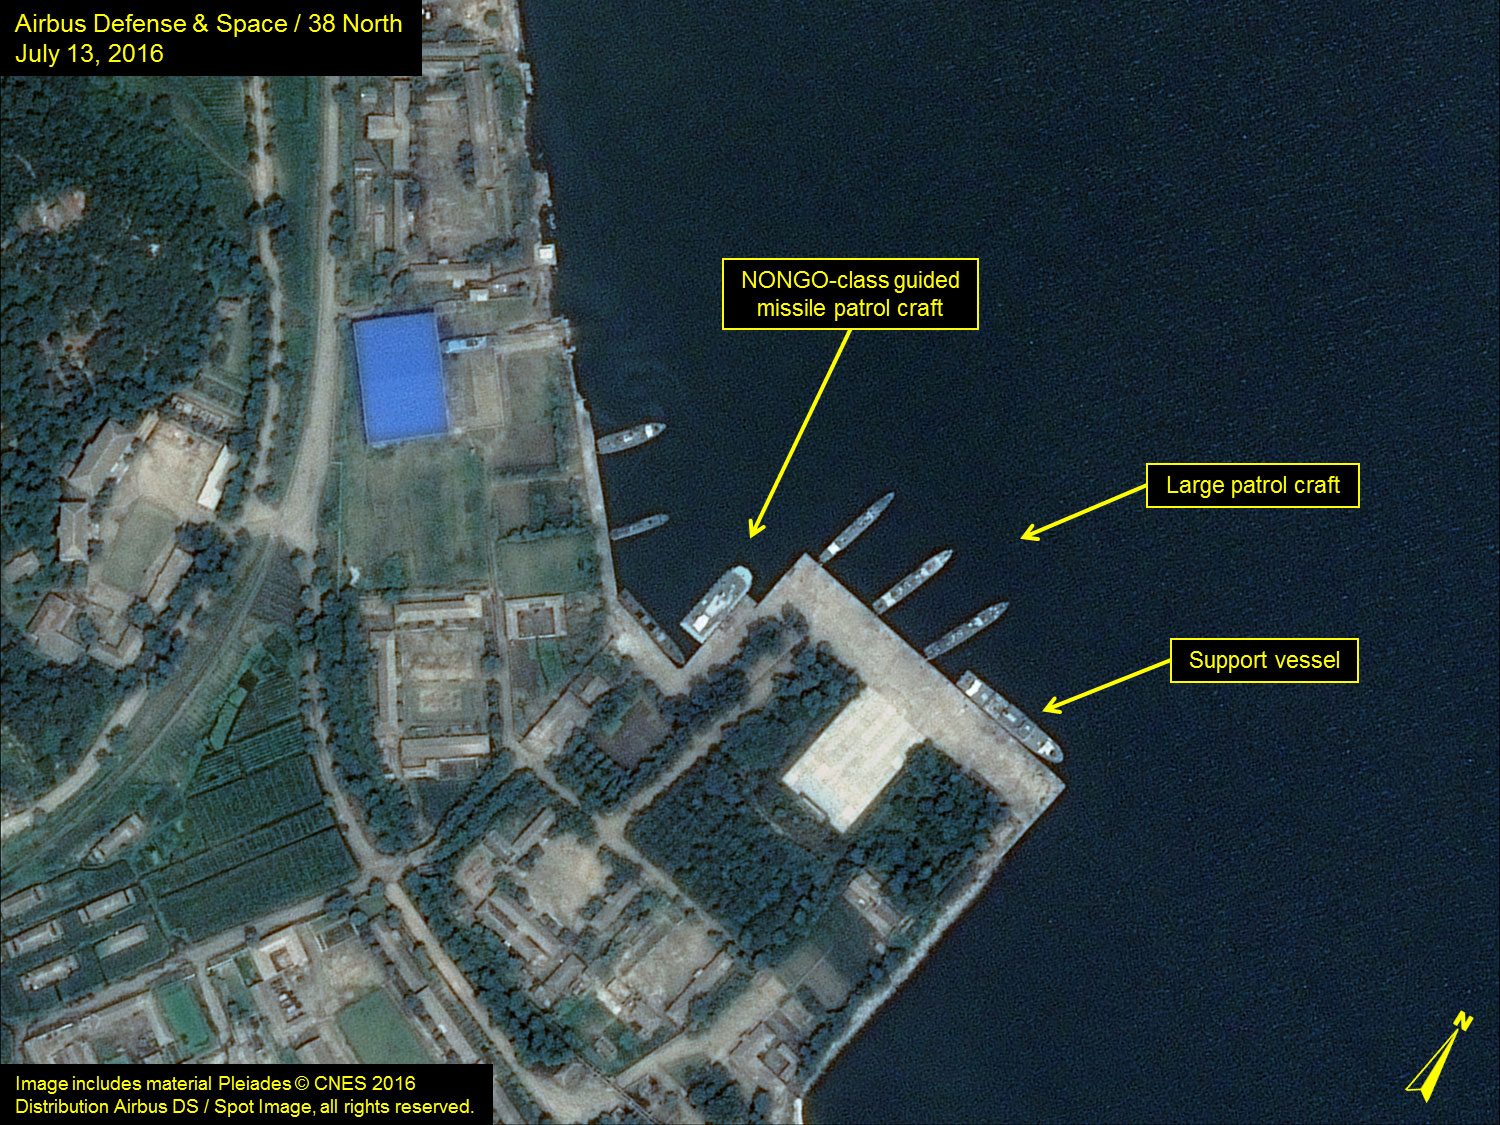 ﻿﻿KPA Navy Upgrades in the East Sea